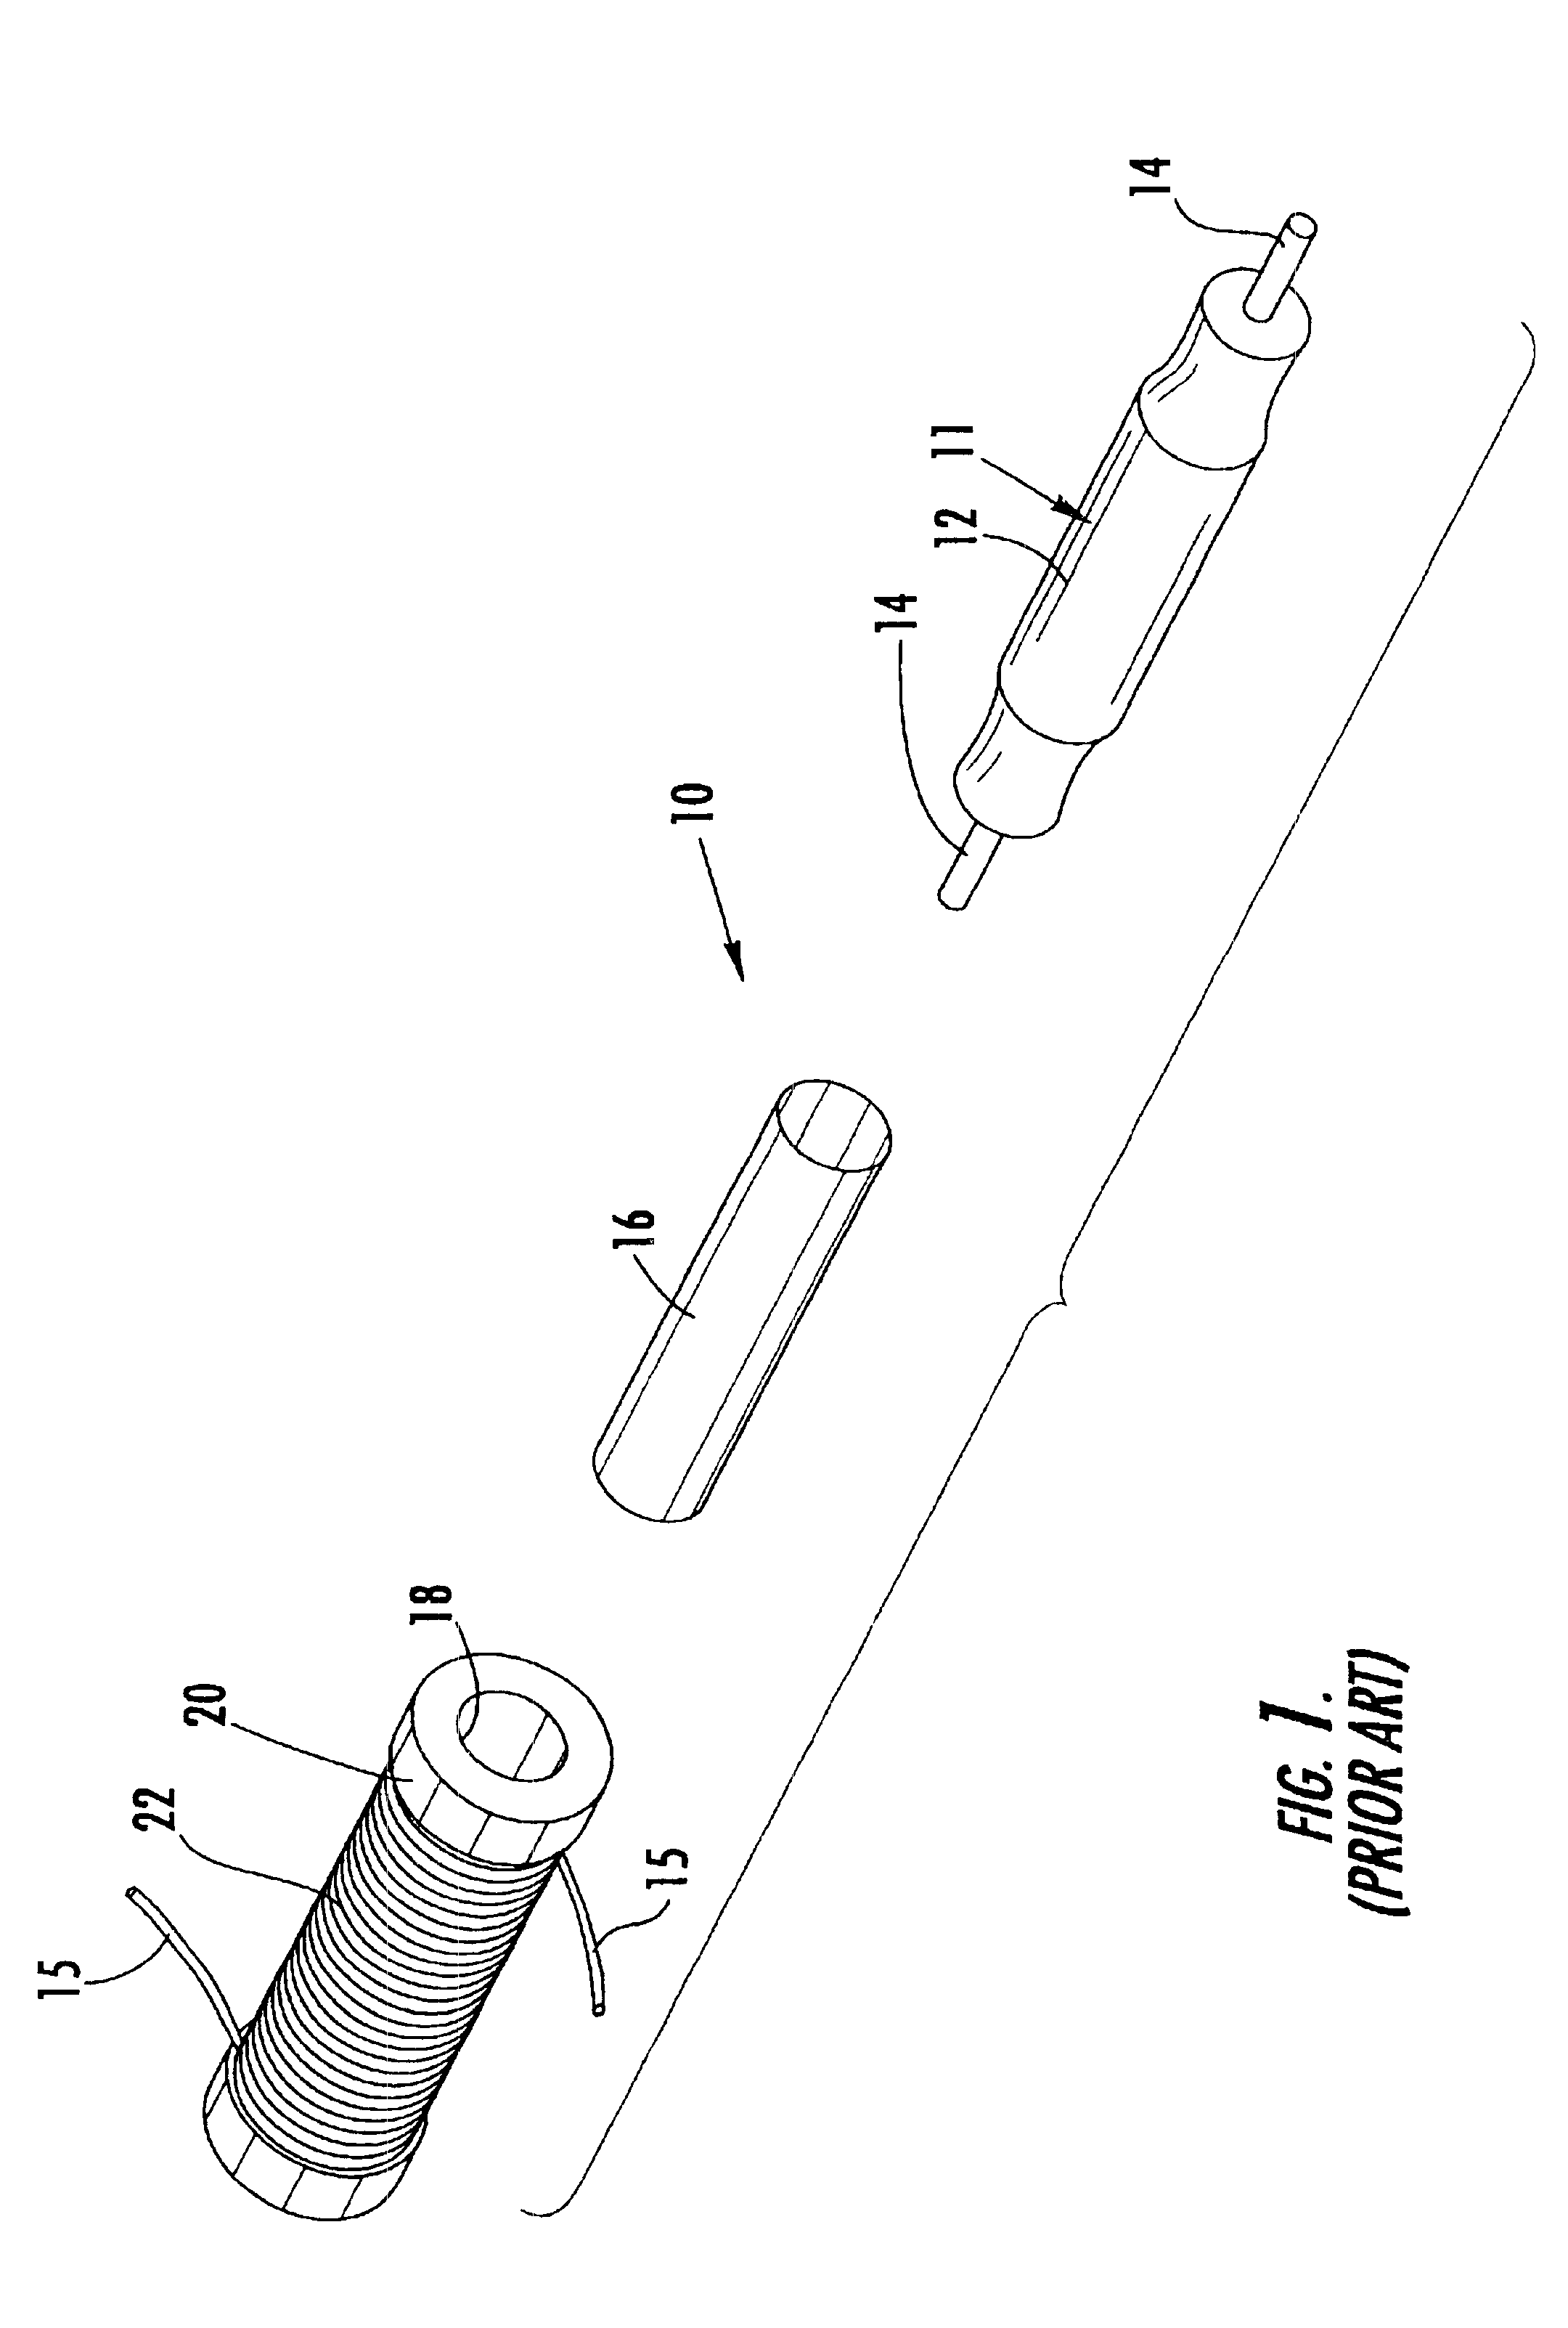 Inverted board mounted electromechanical device